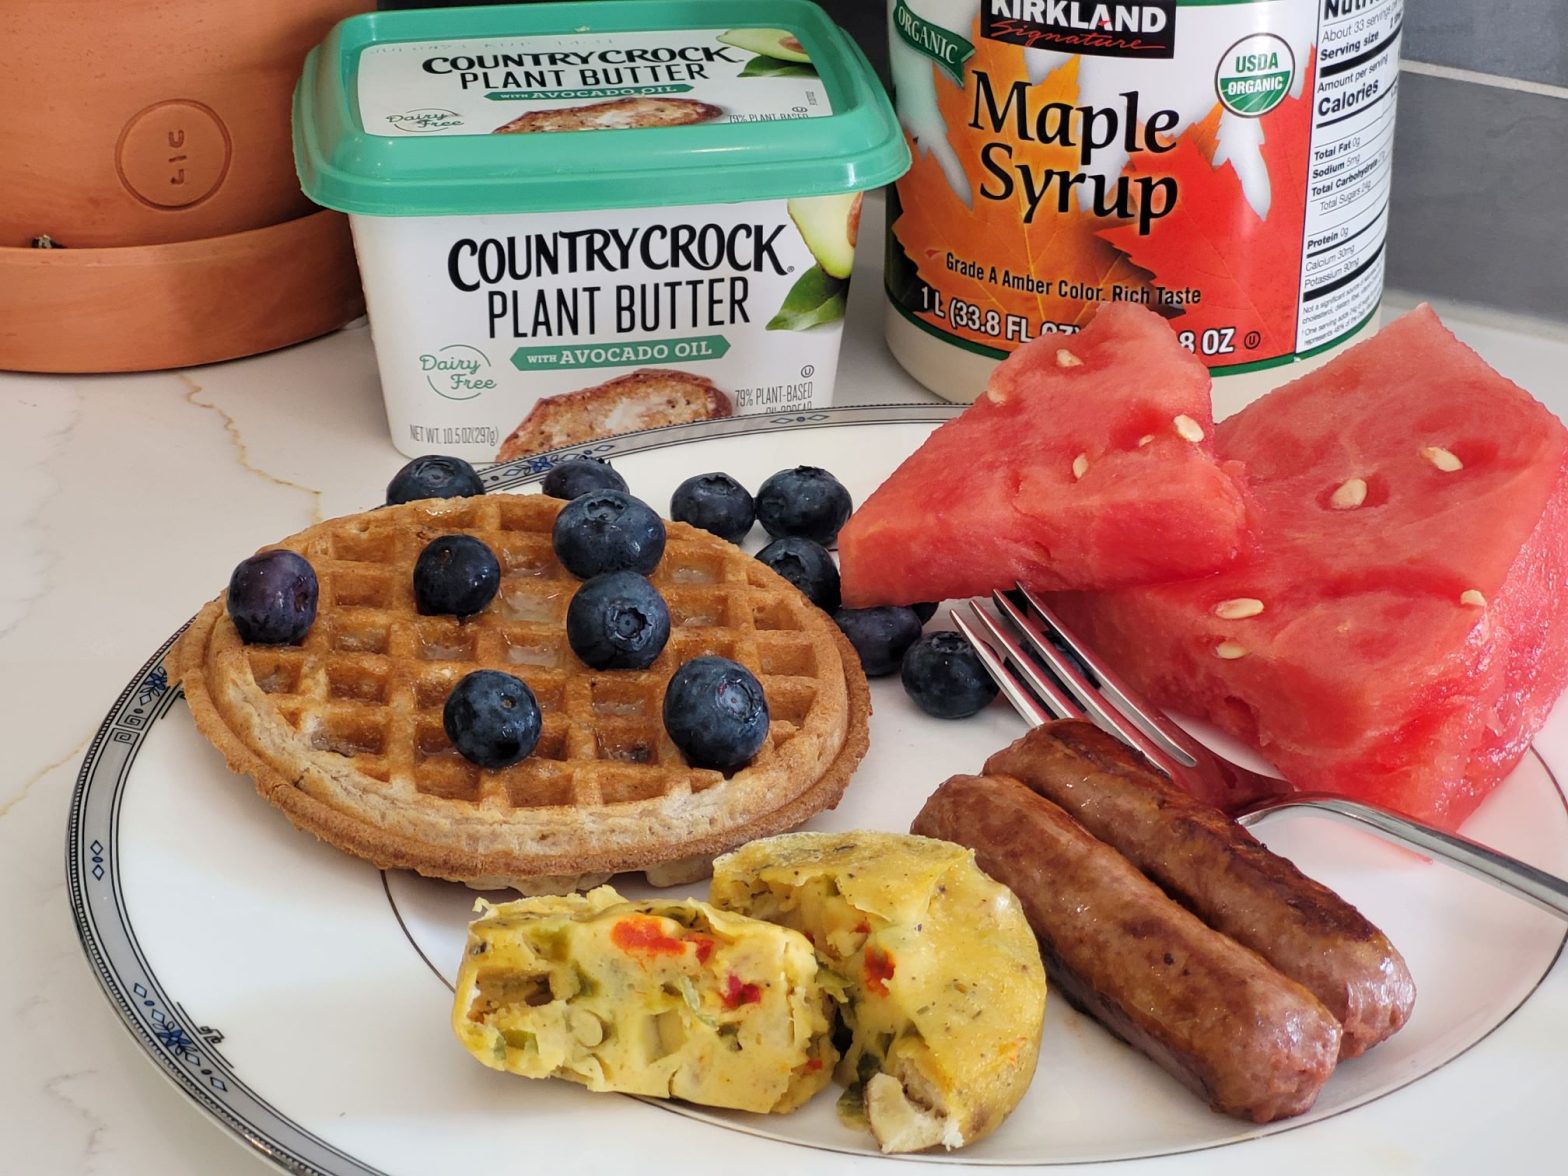 Blueberry waffle, fresh blueberries, vegan egg bites, vegan sausage links, triangles of watermelon on plate with fork